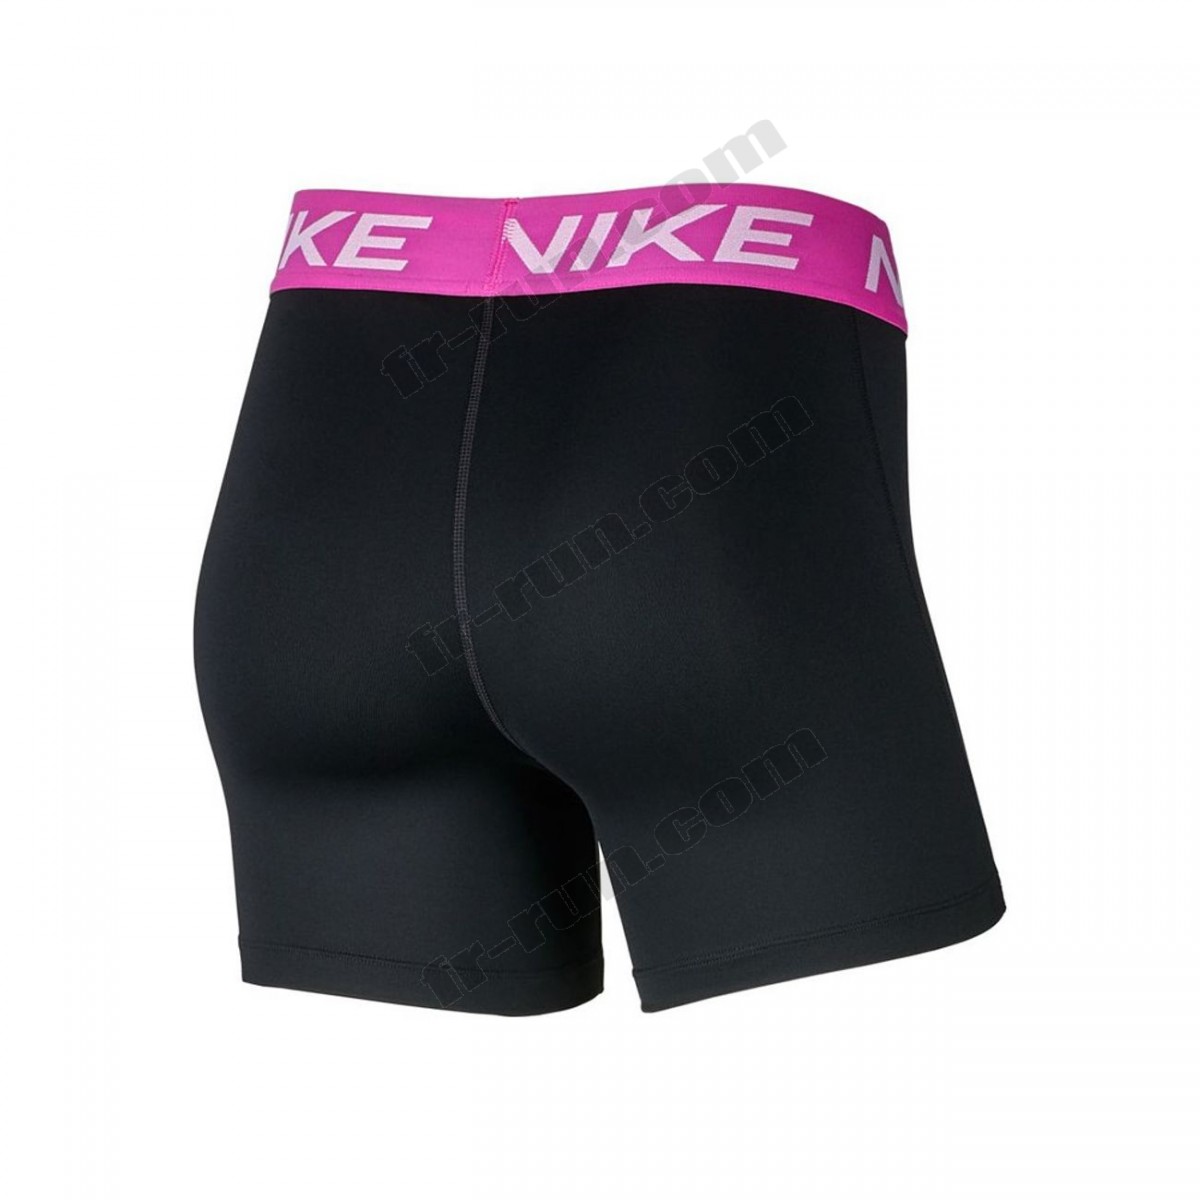 Nike/running femme NIKE Nike Wmns Victory Essential 5 √ Nouveau style √ Soldes - -2